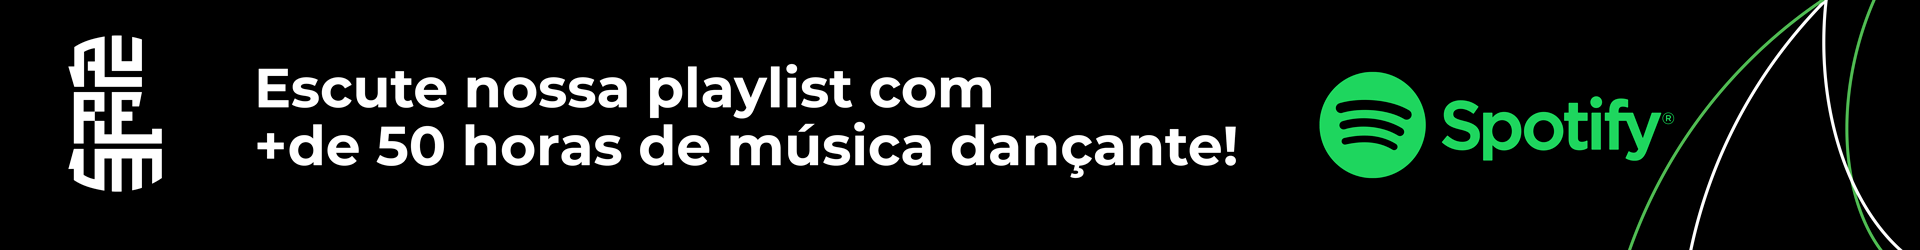 banner_spotify_50hs